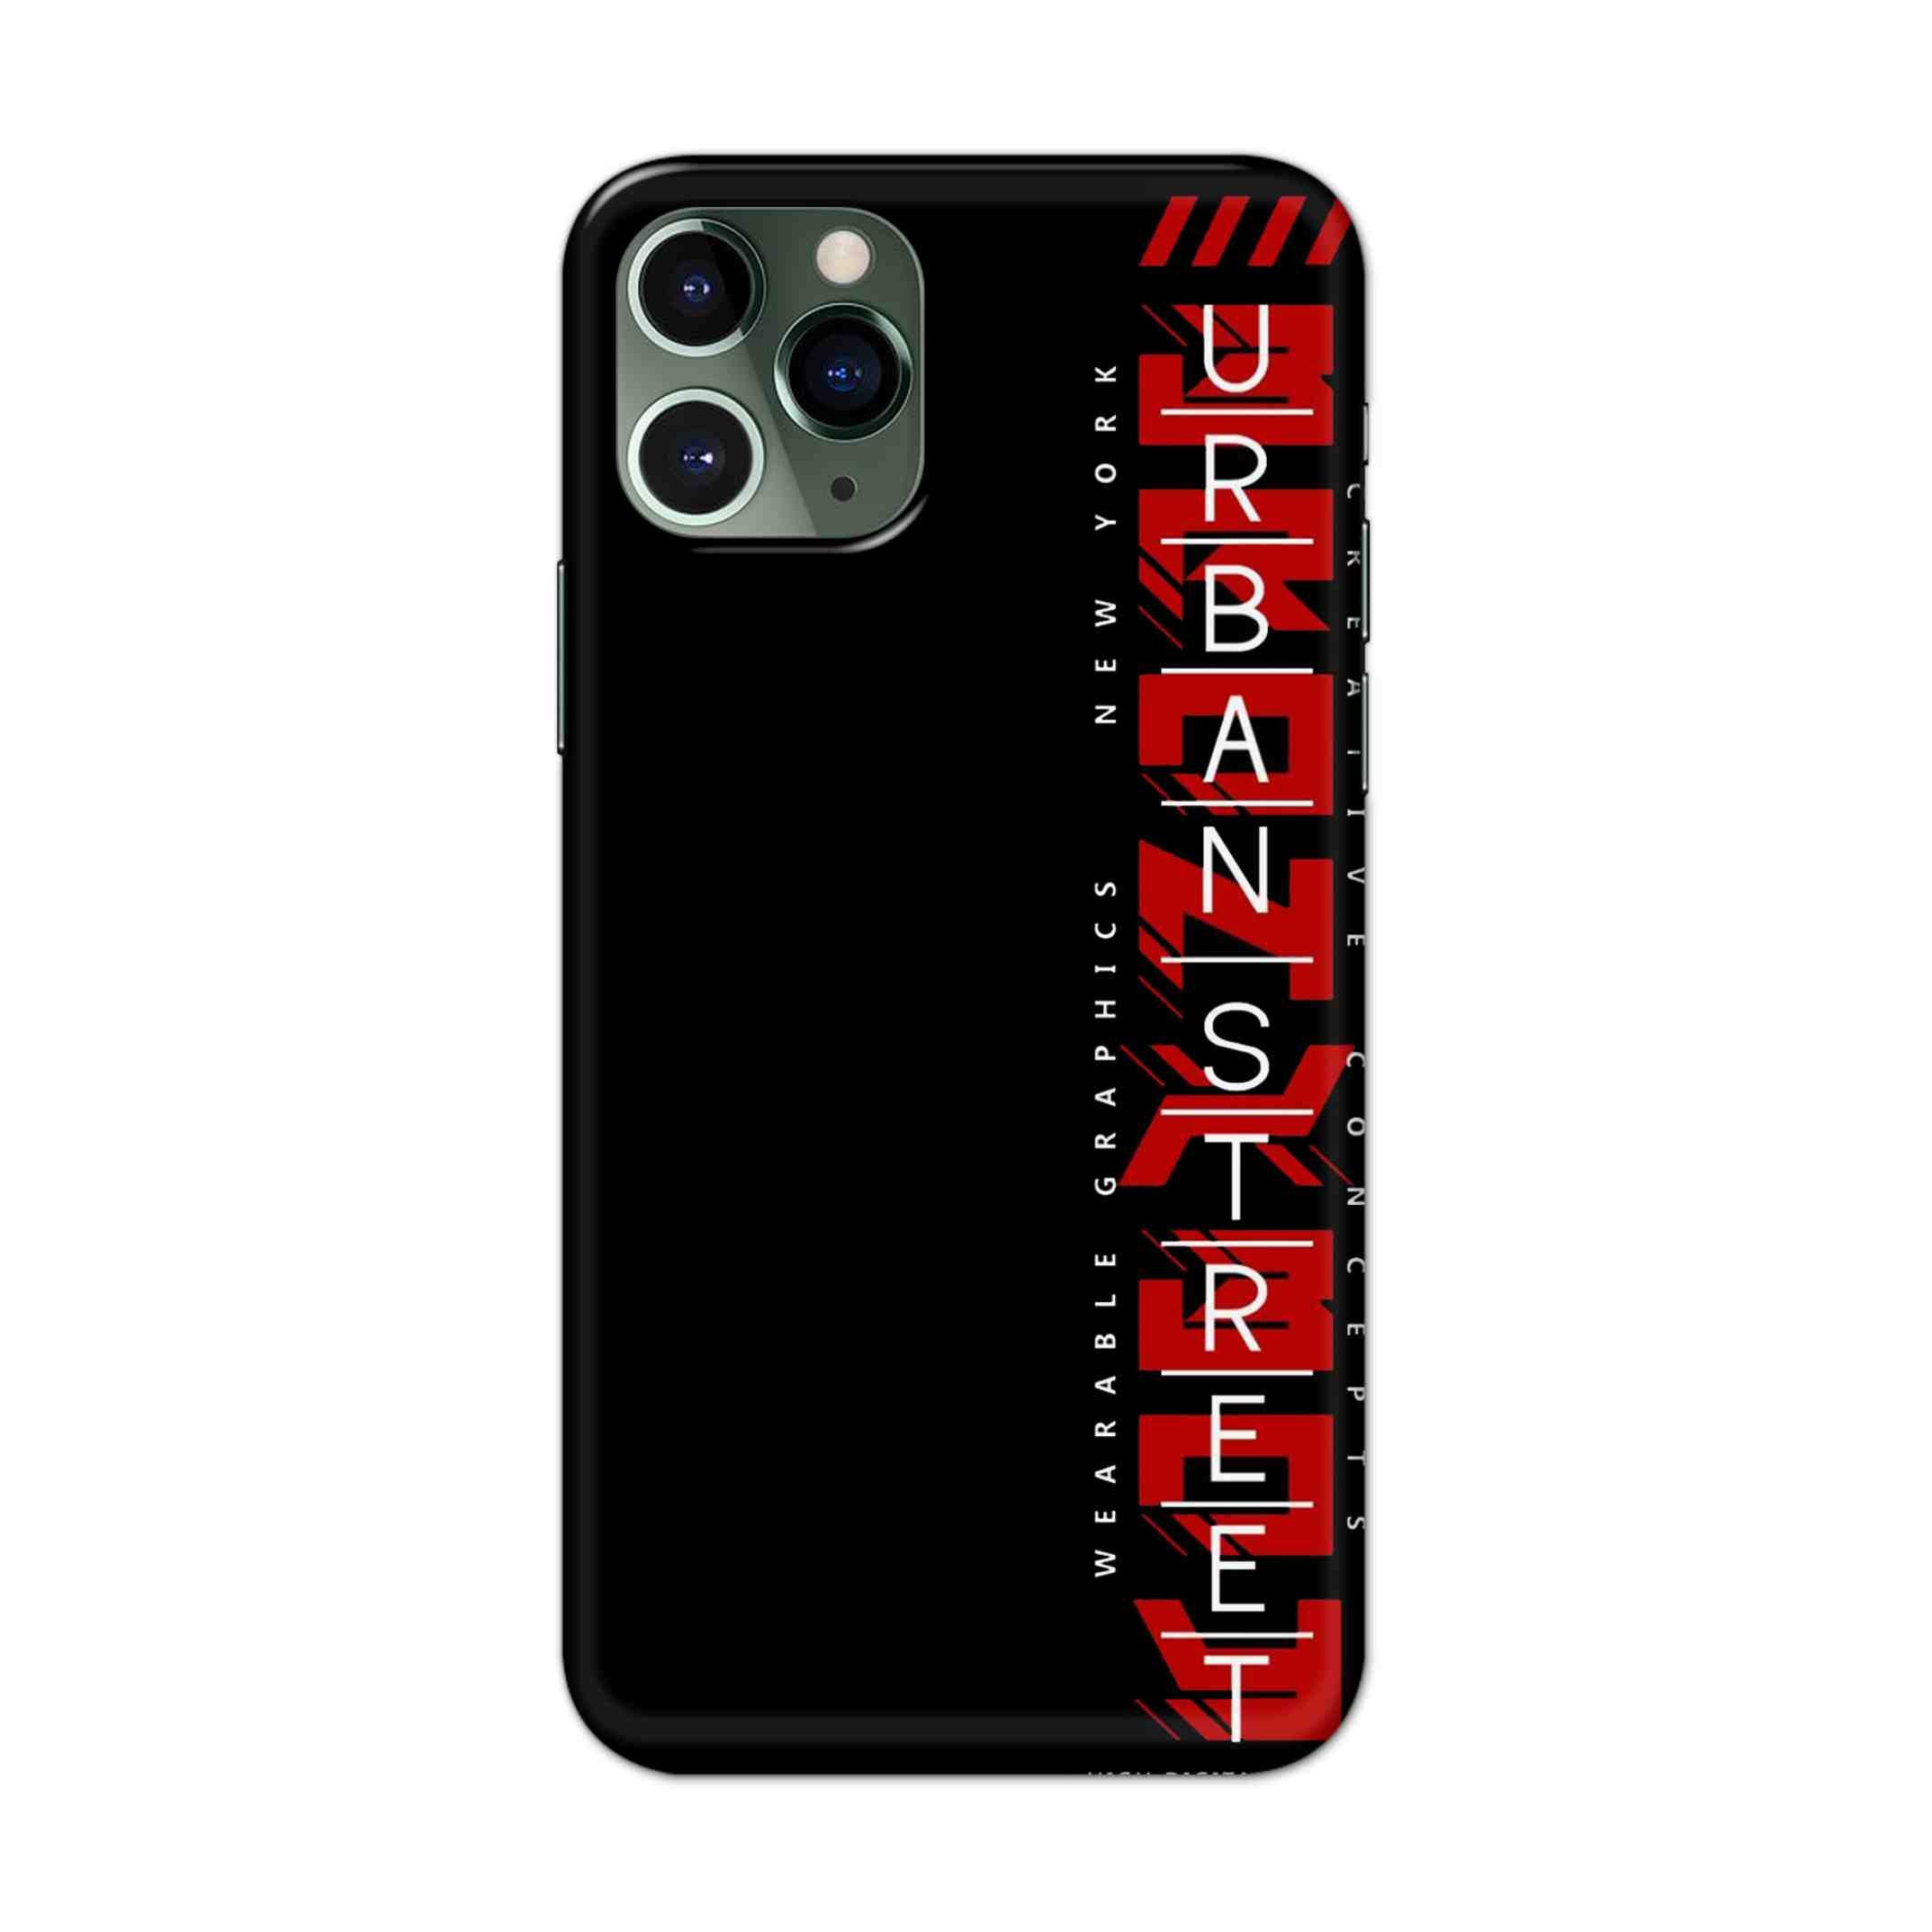 Buy Urban Street Hard Back Mobile Phone Case/Cover For iPhone 11 Pro Max Online